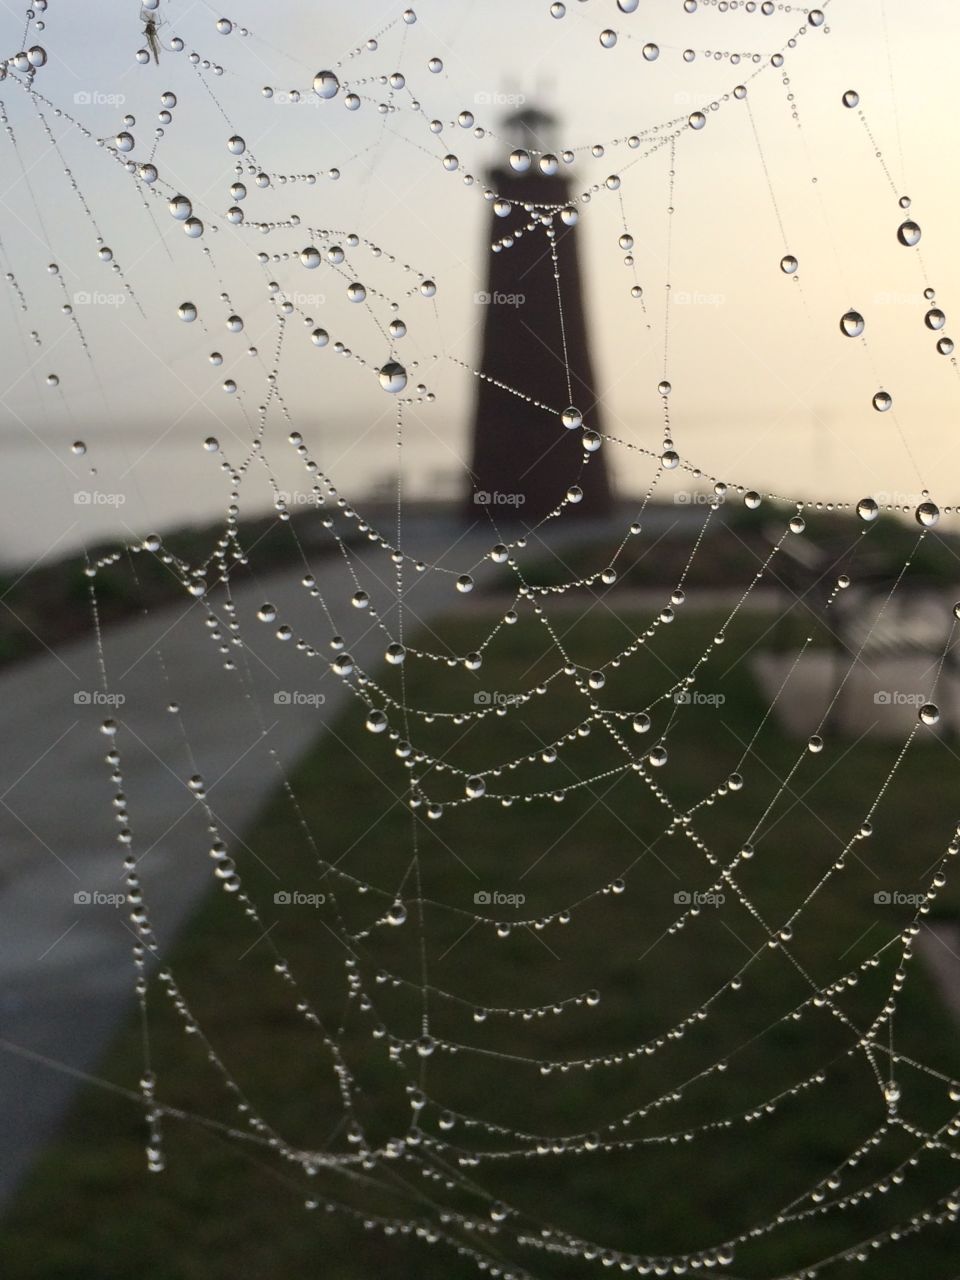 It seems that the spider wanted to catch a lighthouse in its web. That's how it looks on this side of it. But unfortunatelly it got flooded. 